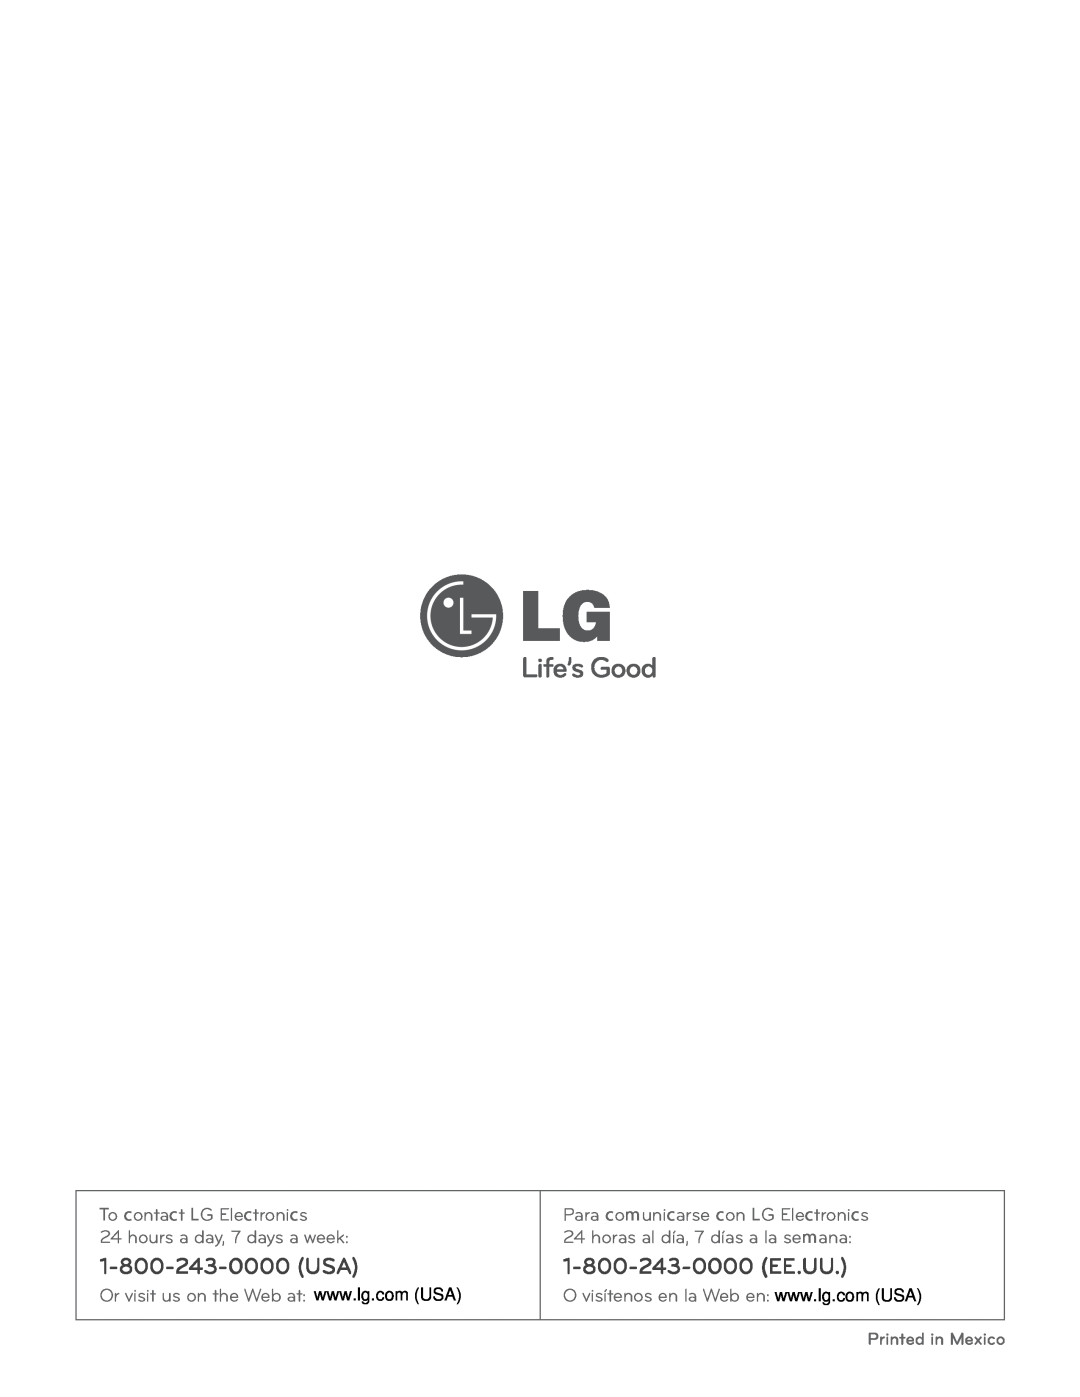 LG Electronics LRG3097ST To contact LG Electronics, hours a day, 7 days a week, Para comunicarse con LG Electronics 